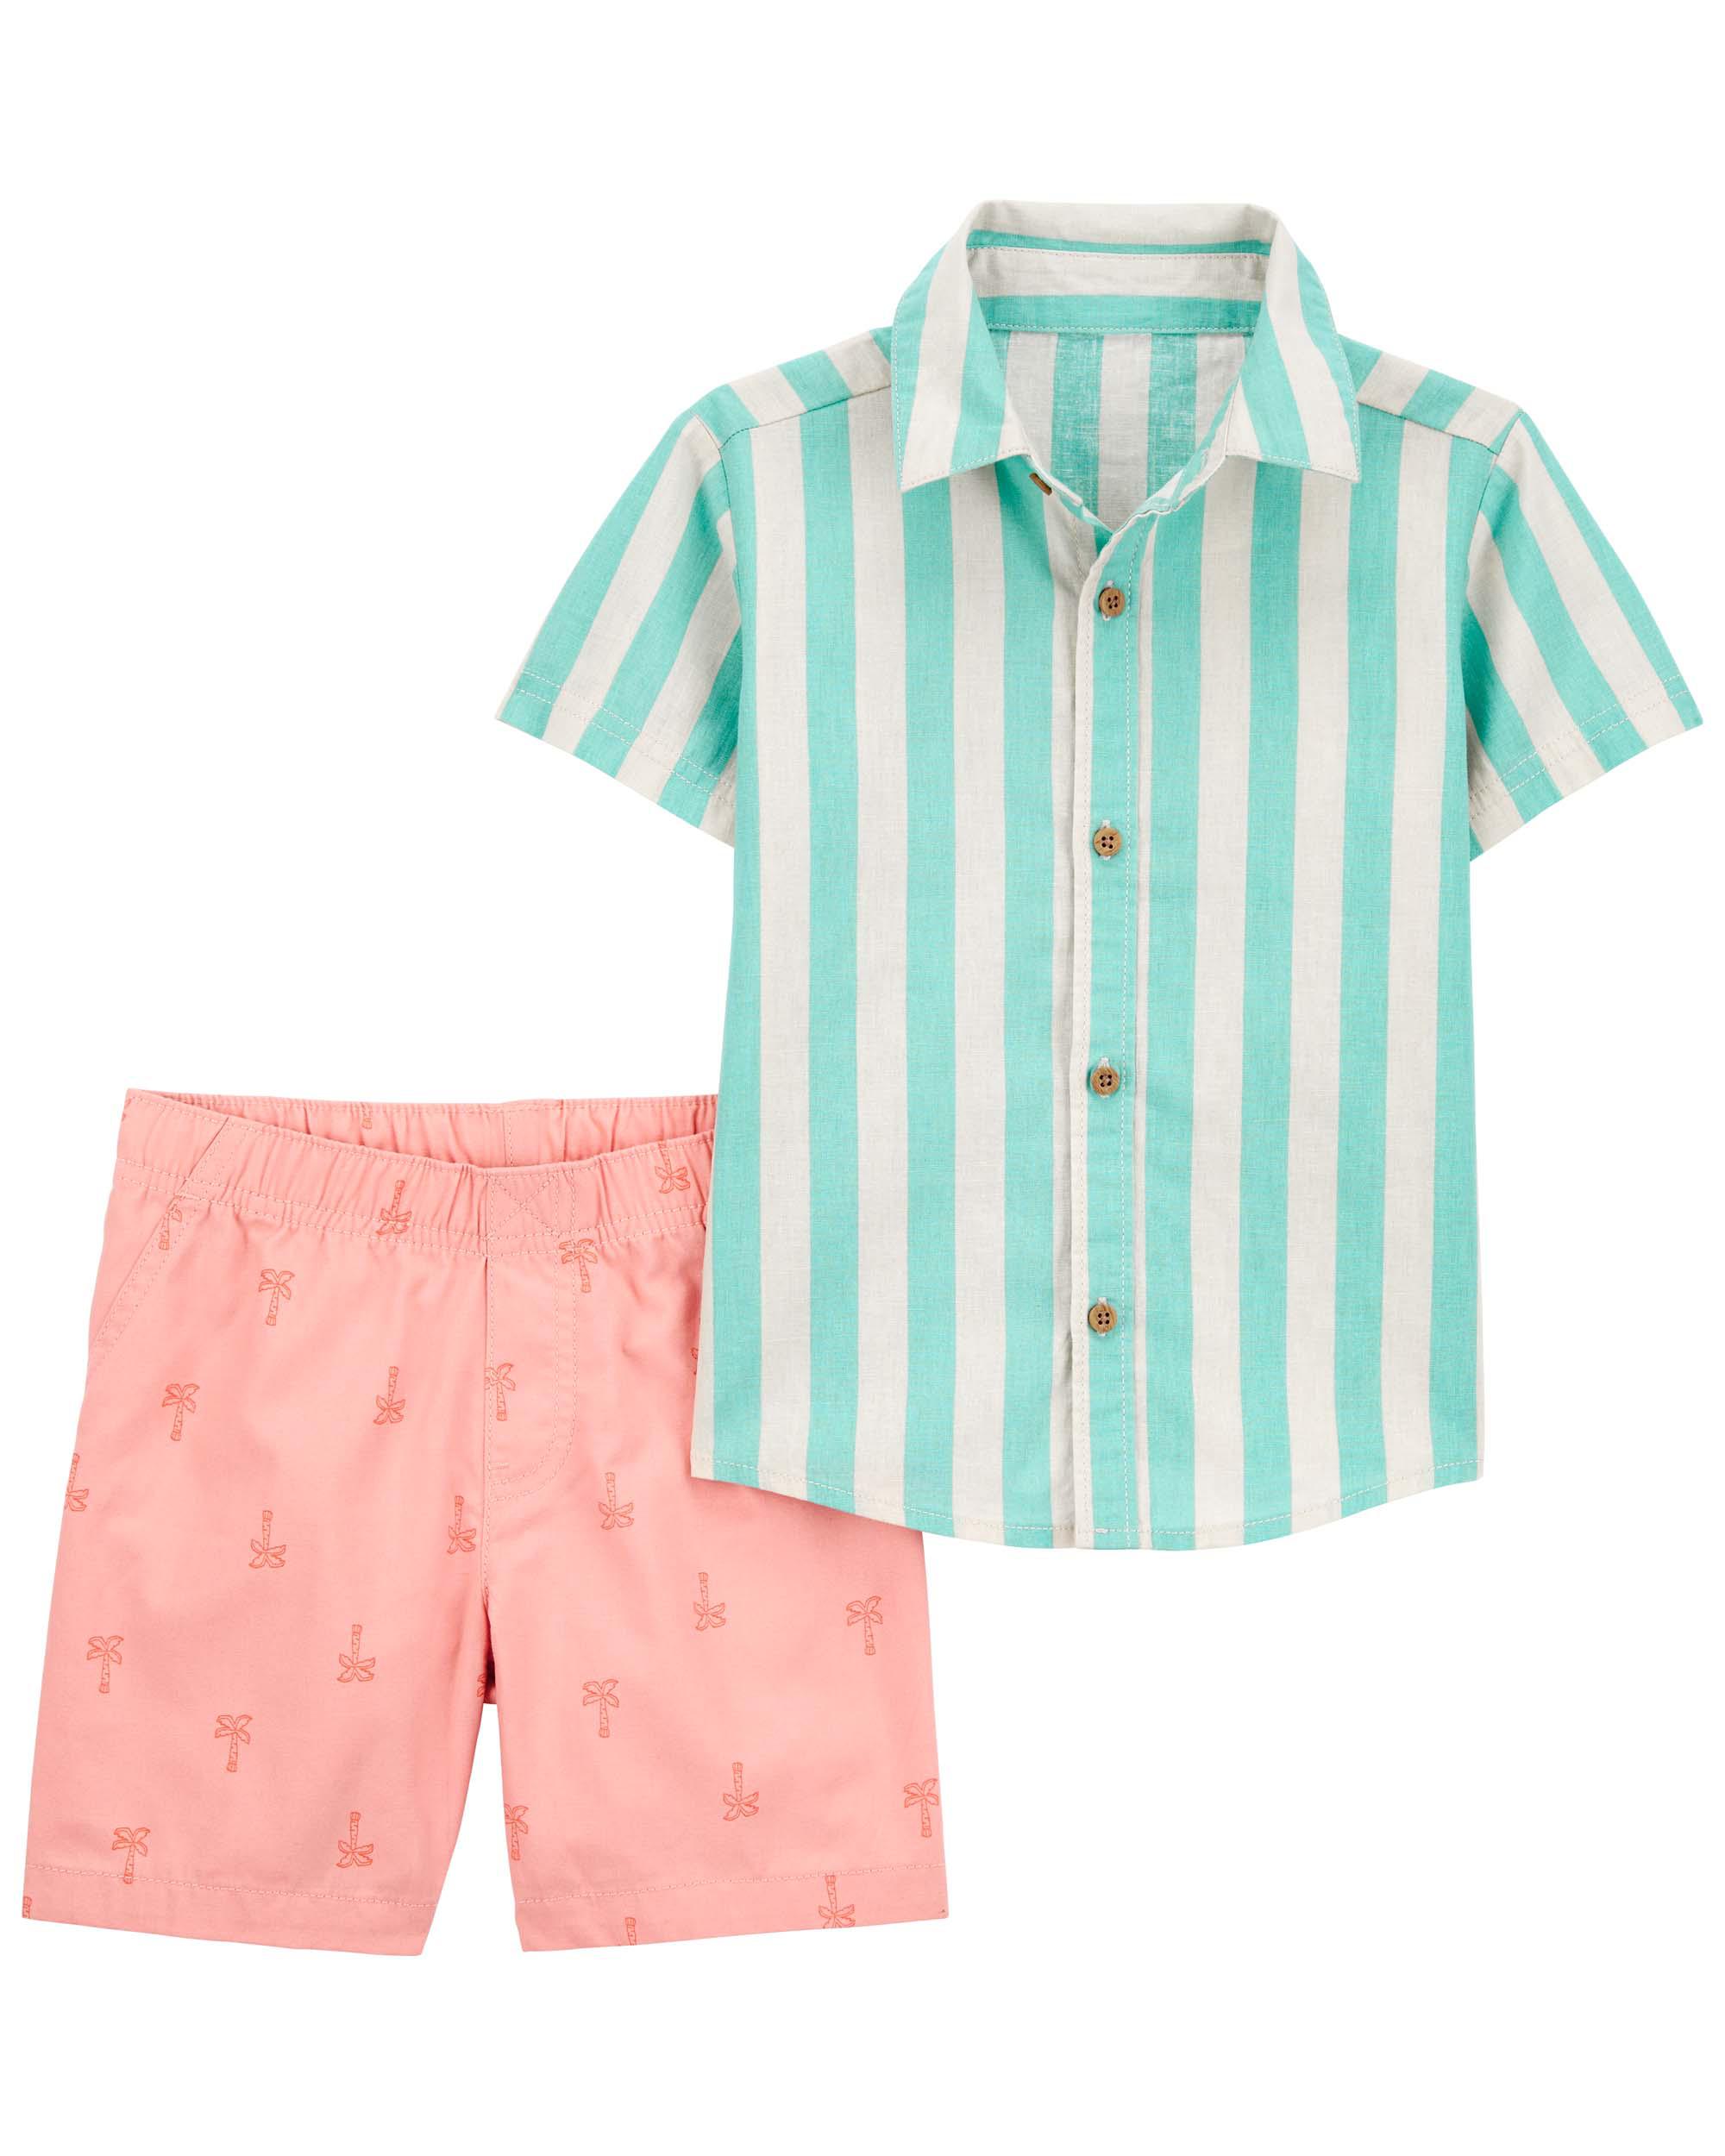 Toddler 2-Piece Striped Shirt and Shorts Set